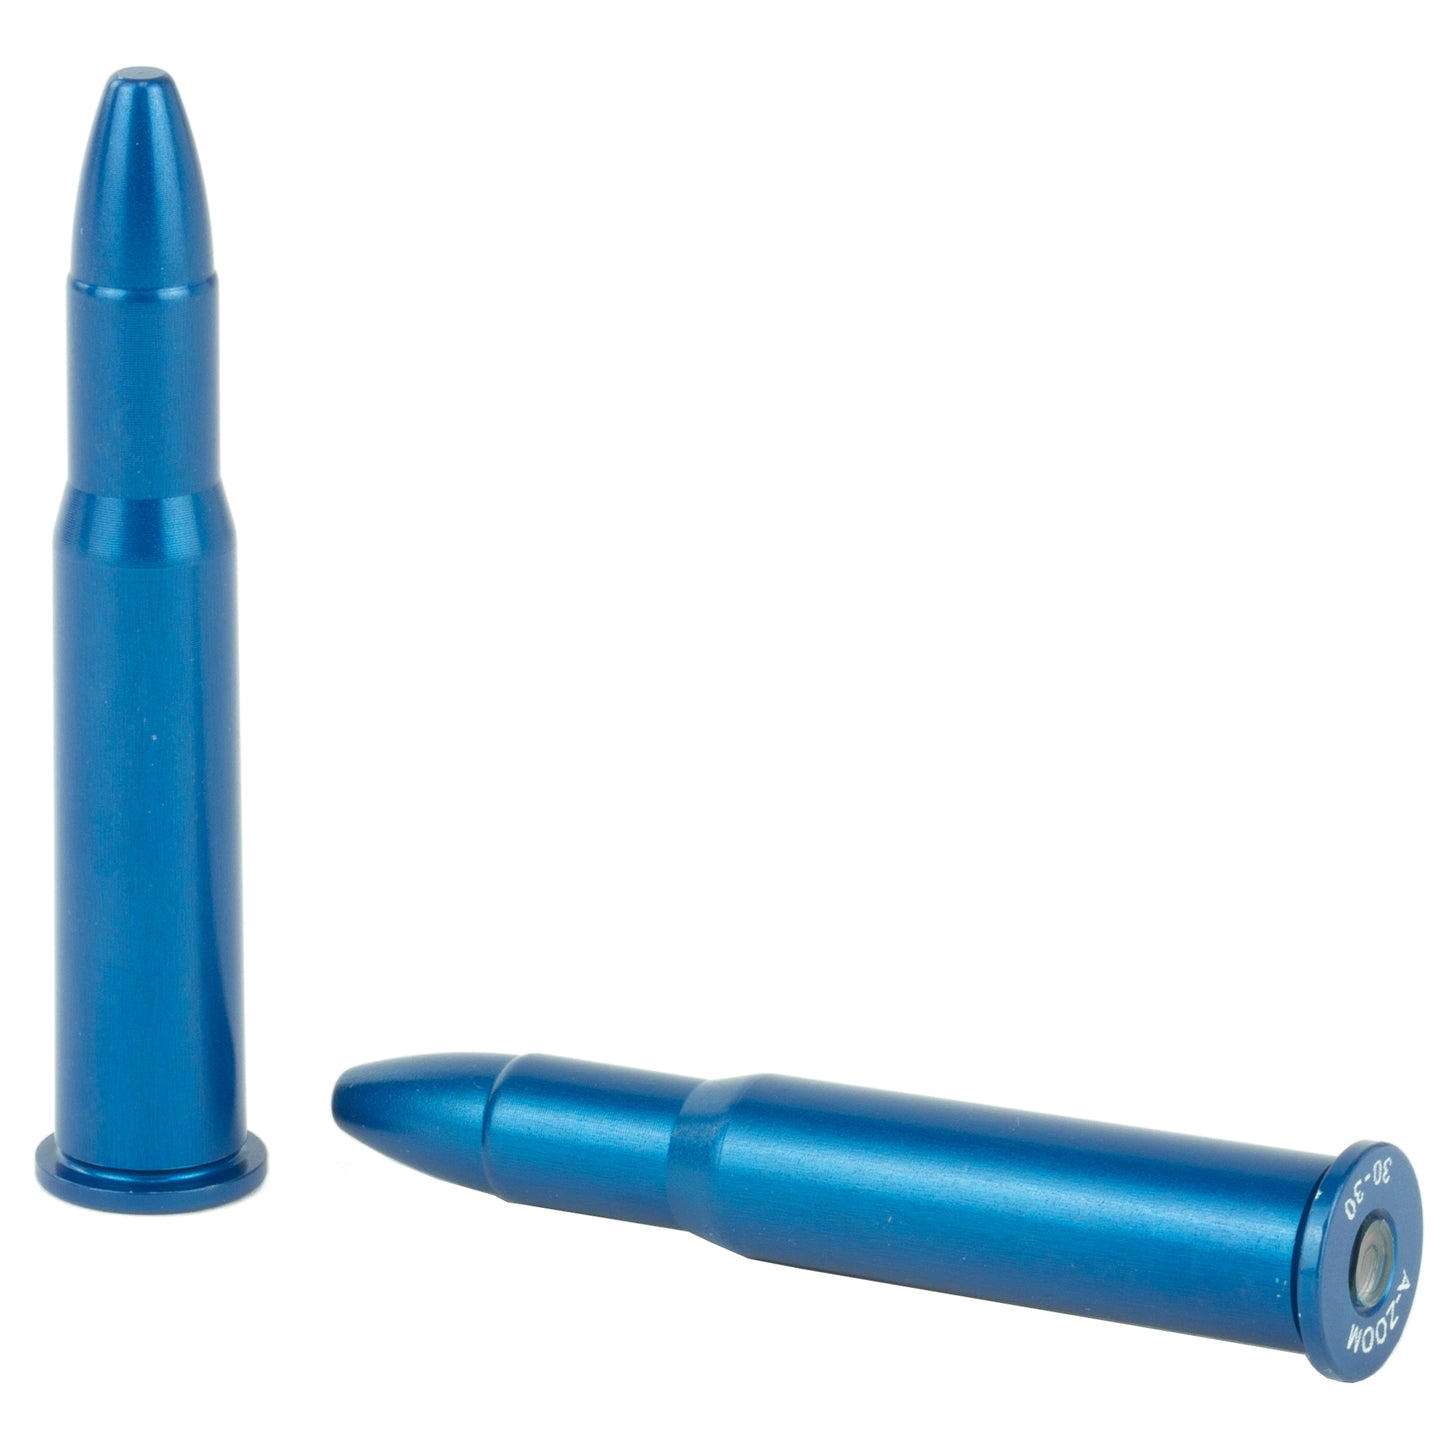 A-Zoom Snap Caps safety training 30-30 Winchester 5 Pack solid aluminum 12329 - California Shooting Supplies